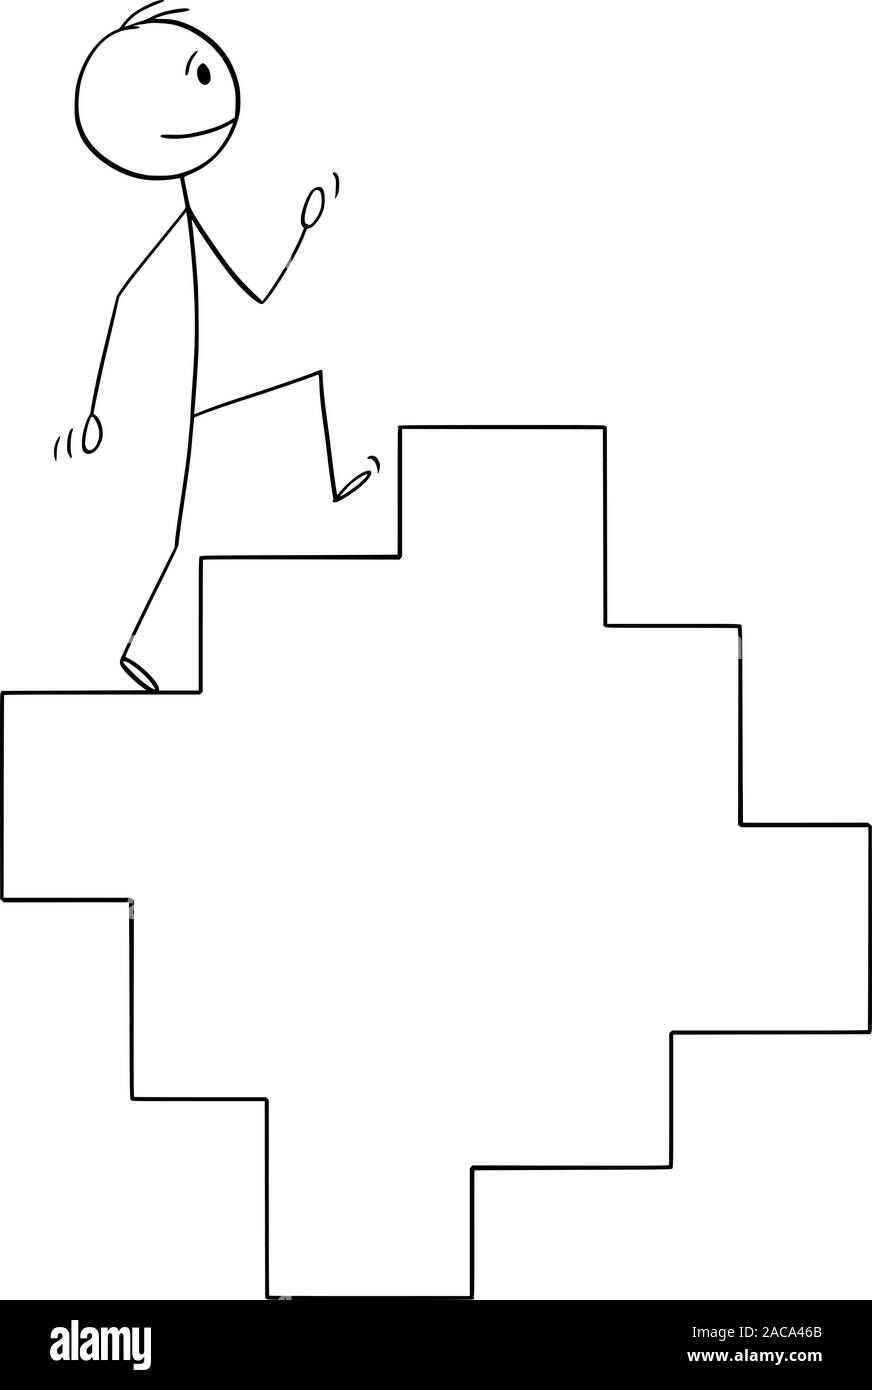 Vector cartoon stick figure drawing conceptual illustration of man or businessman walking on endless staircase, stairway or stairs in cycle. Stock Vector